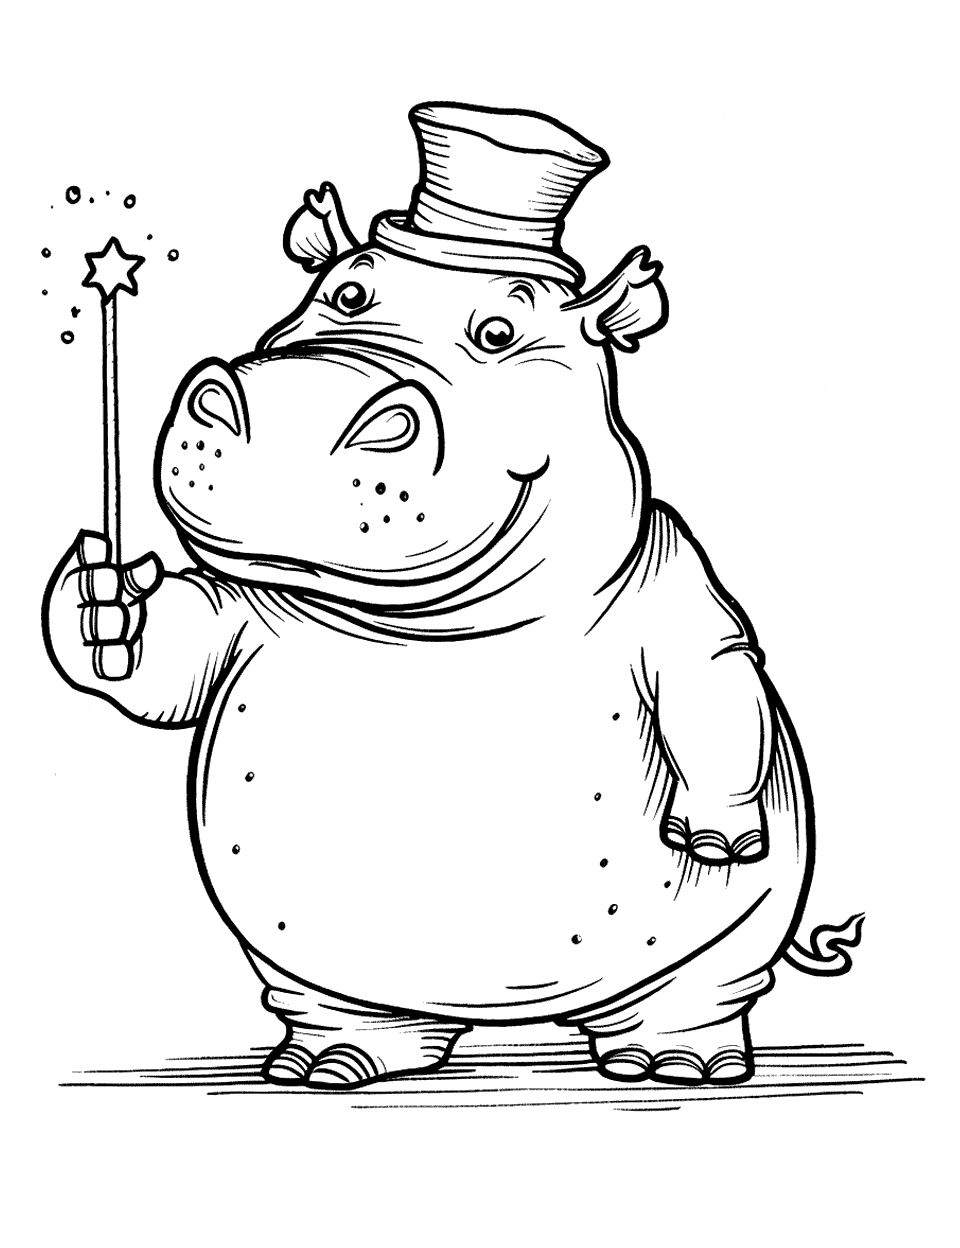 Hippo Magician Coloring Page - A hippo wearing a magician’s hat and holding a magic wand, ready to perform tricks on stage.